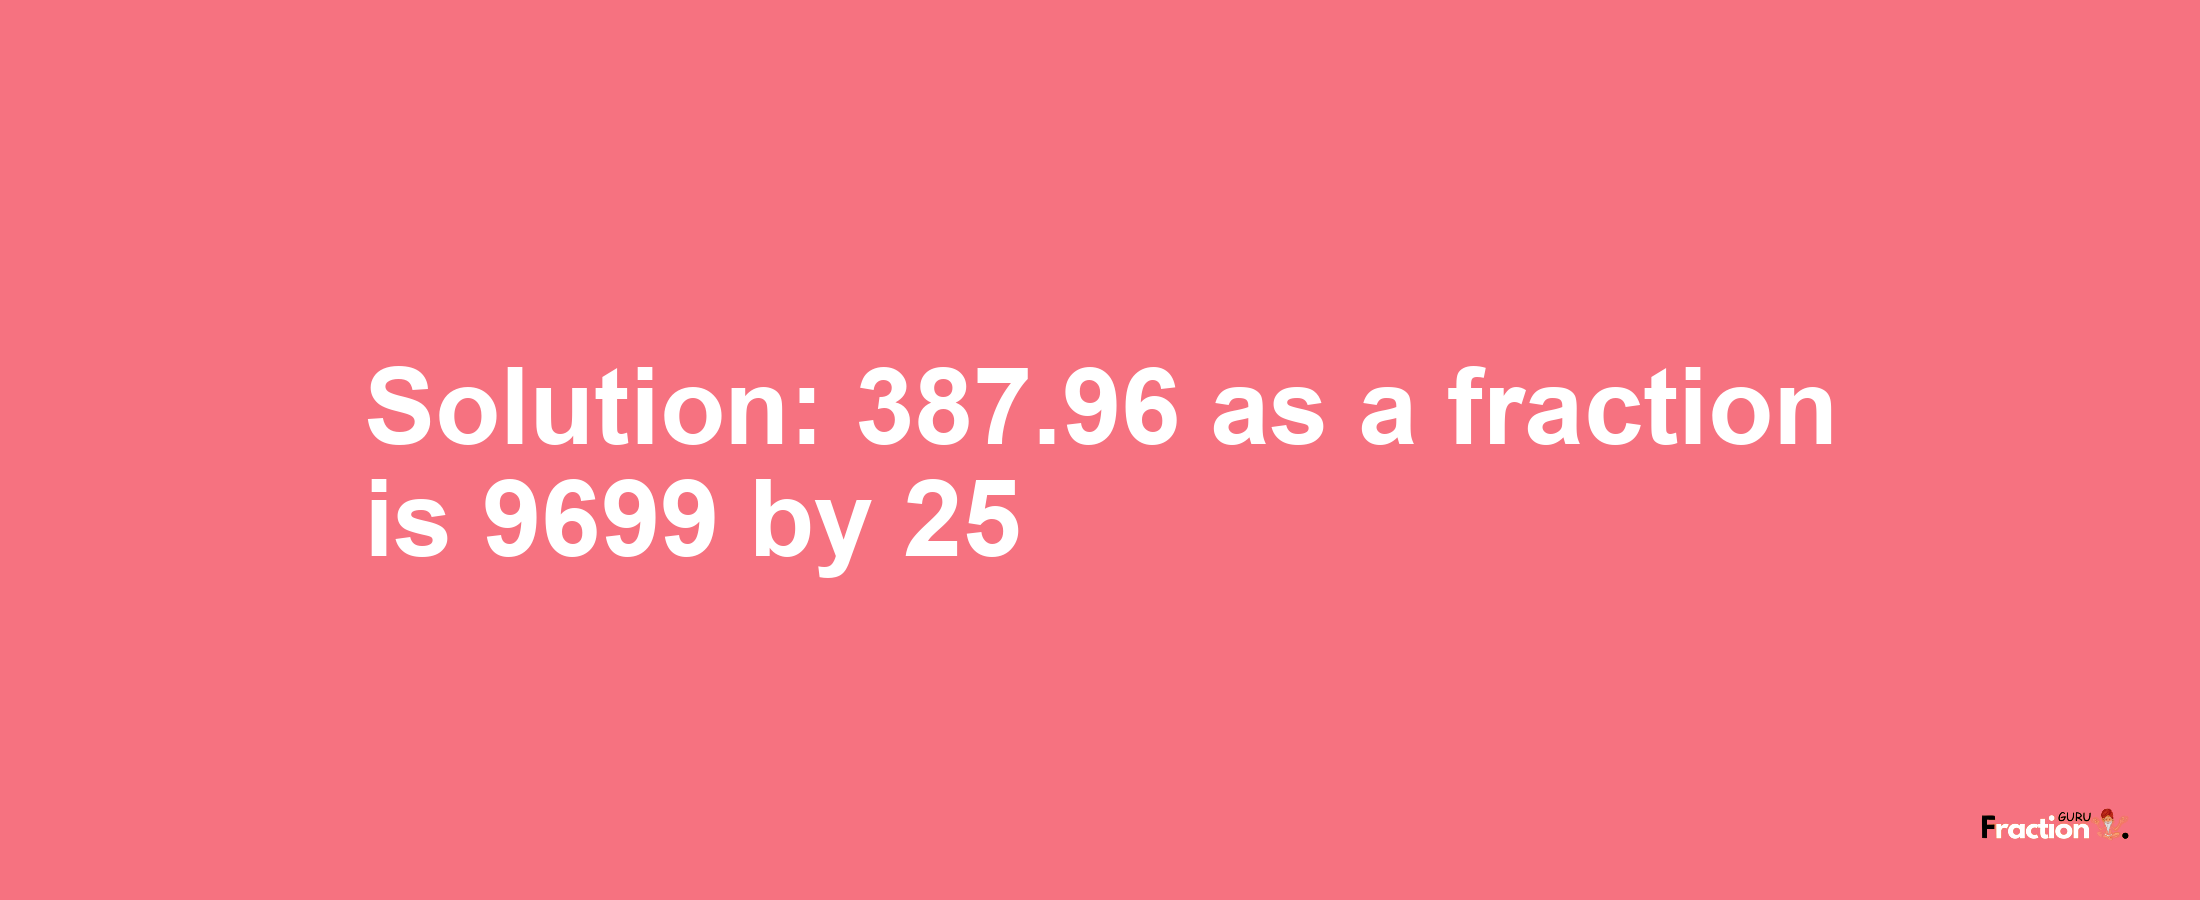 Solution:387.96 as a fraction is 9699/25